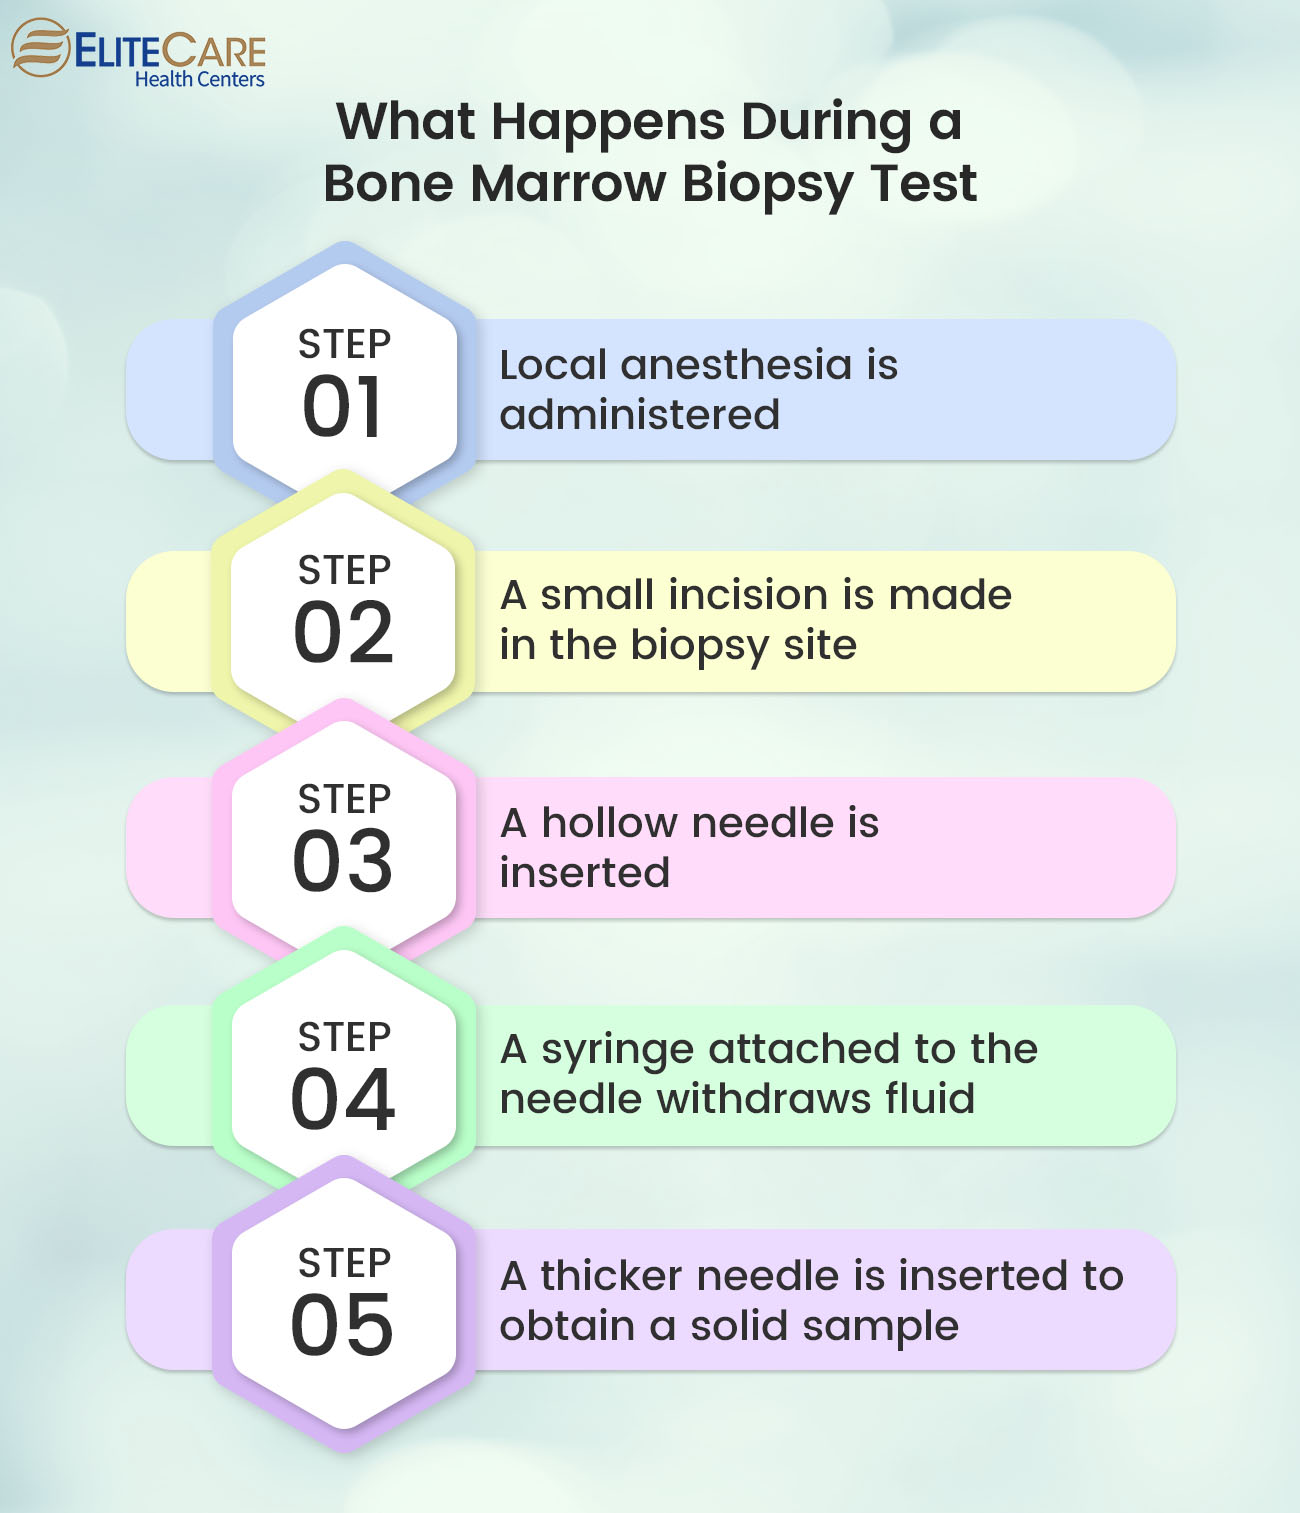 What Happens During a Bone Marrow Biopsy Test